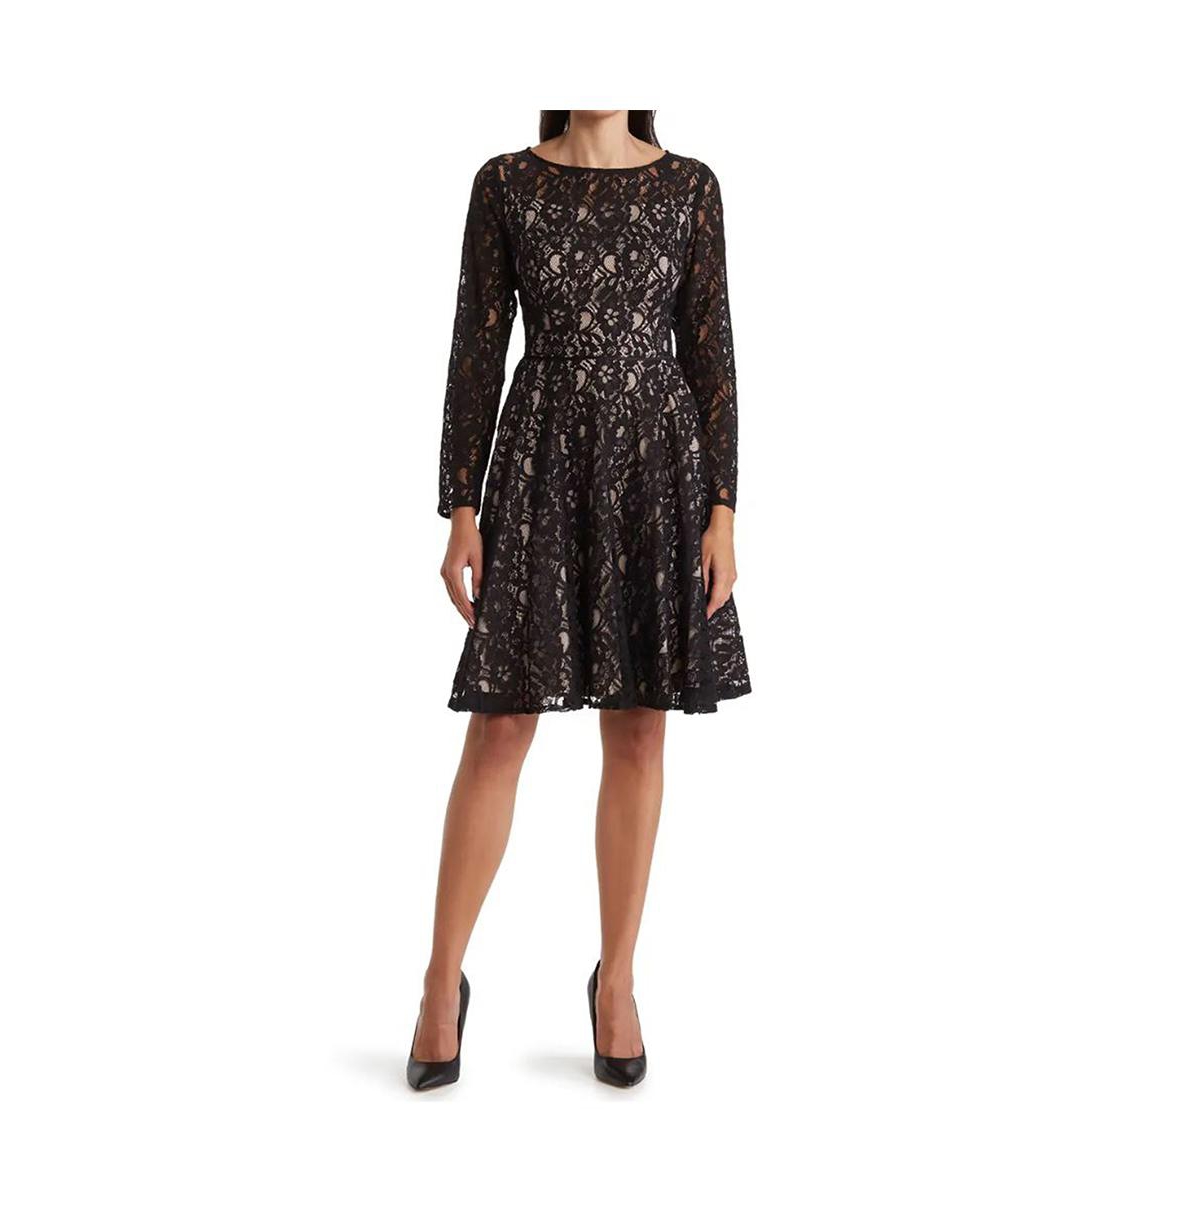 FOCUS BY SHANI FIT AND FLARE LACE DRESS